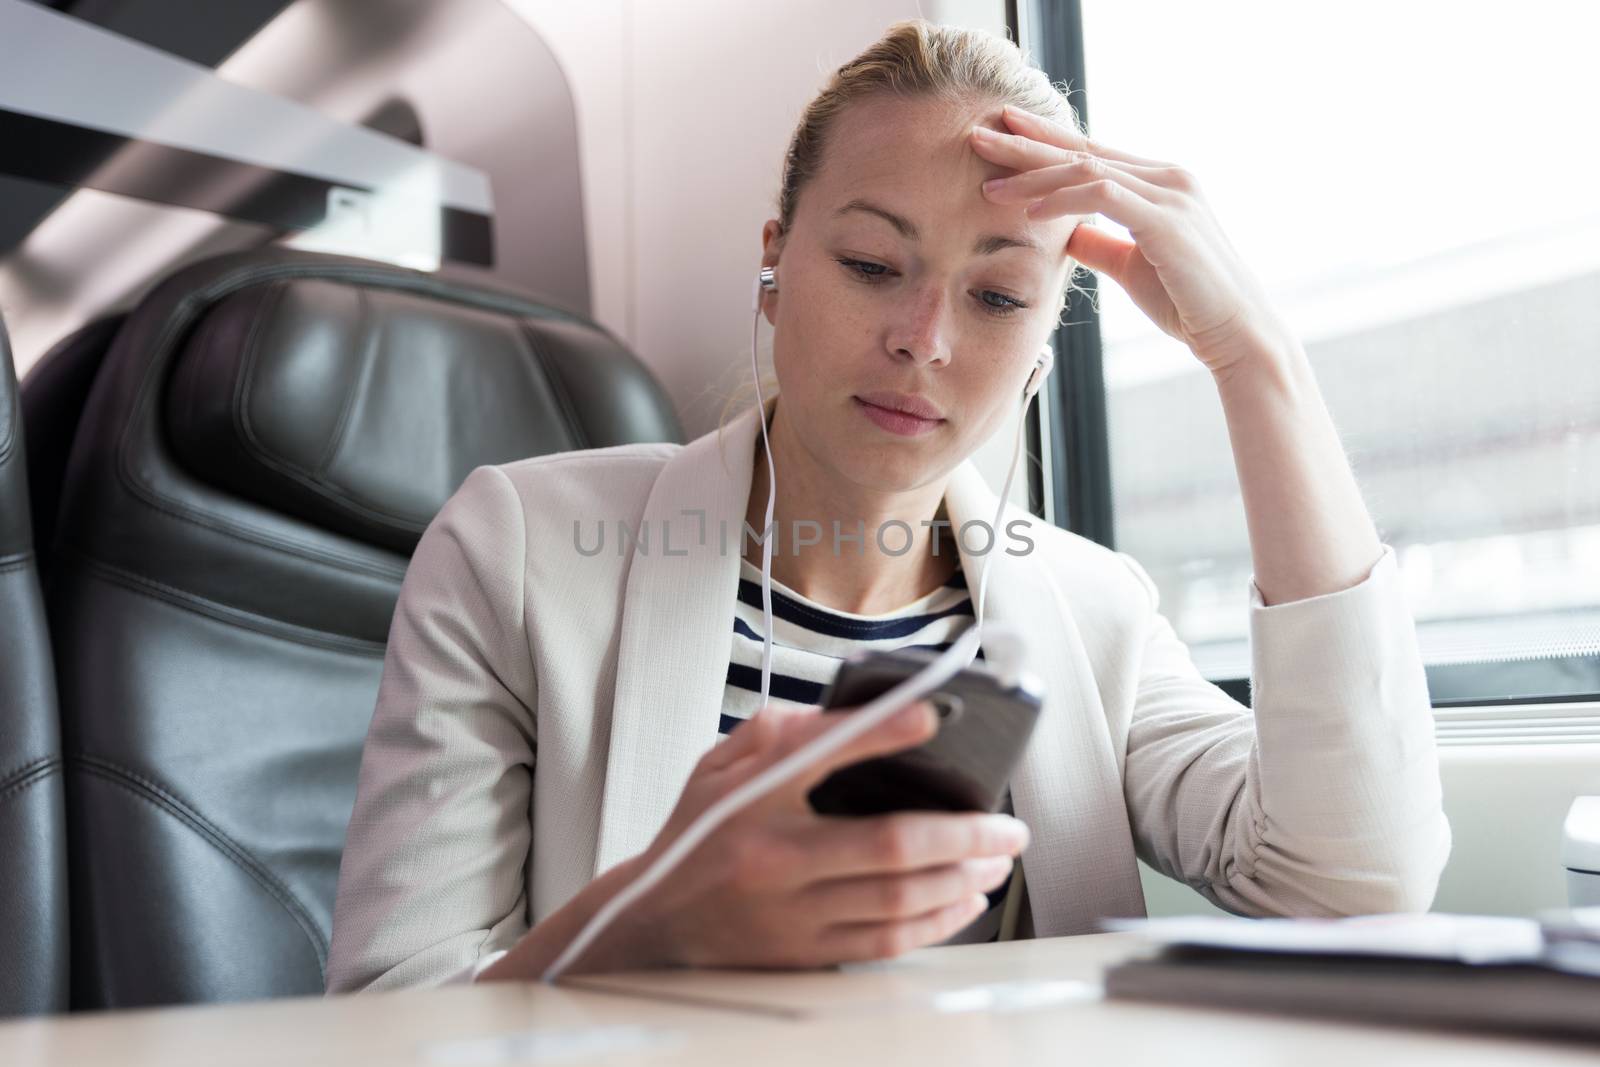 Caucasian businesswoman communicating on cellphone using headphone set while traveling by train in business class seat.